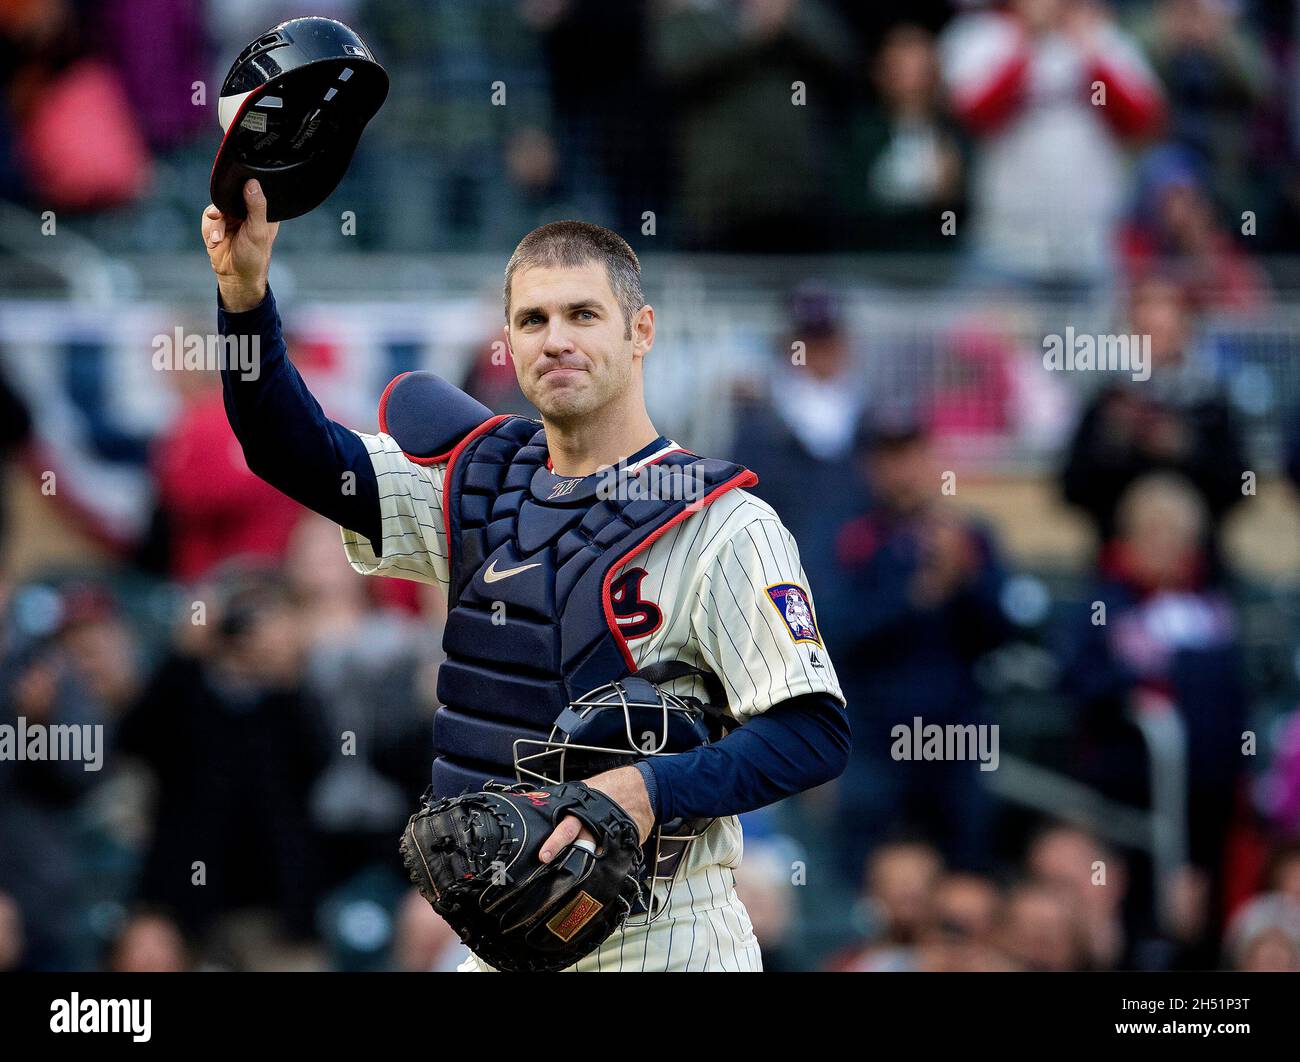 Minneapolis, USA. 30th Sep, 2018. Joe Mauer played catcher from 2004-2013 with the Minnesota Twins and is well worthy of a place in the Hall of Fame's backstop wing. (Photo by Carlos Gonzalez/Minneapolis Star Tribune/TNS/Sipa USA) Credit: Sipa USA/Alamy Live News Stock Photo